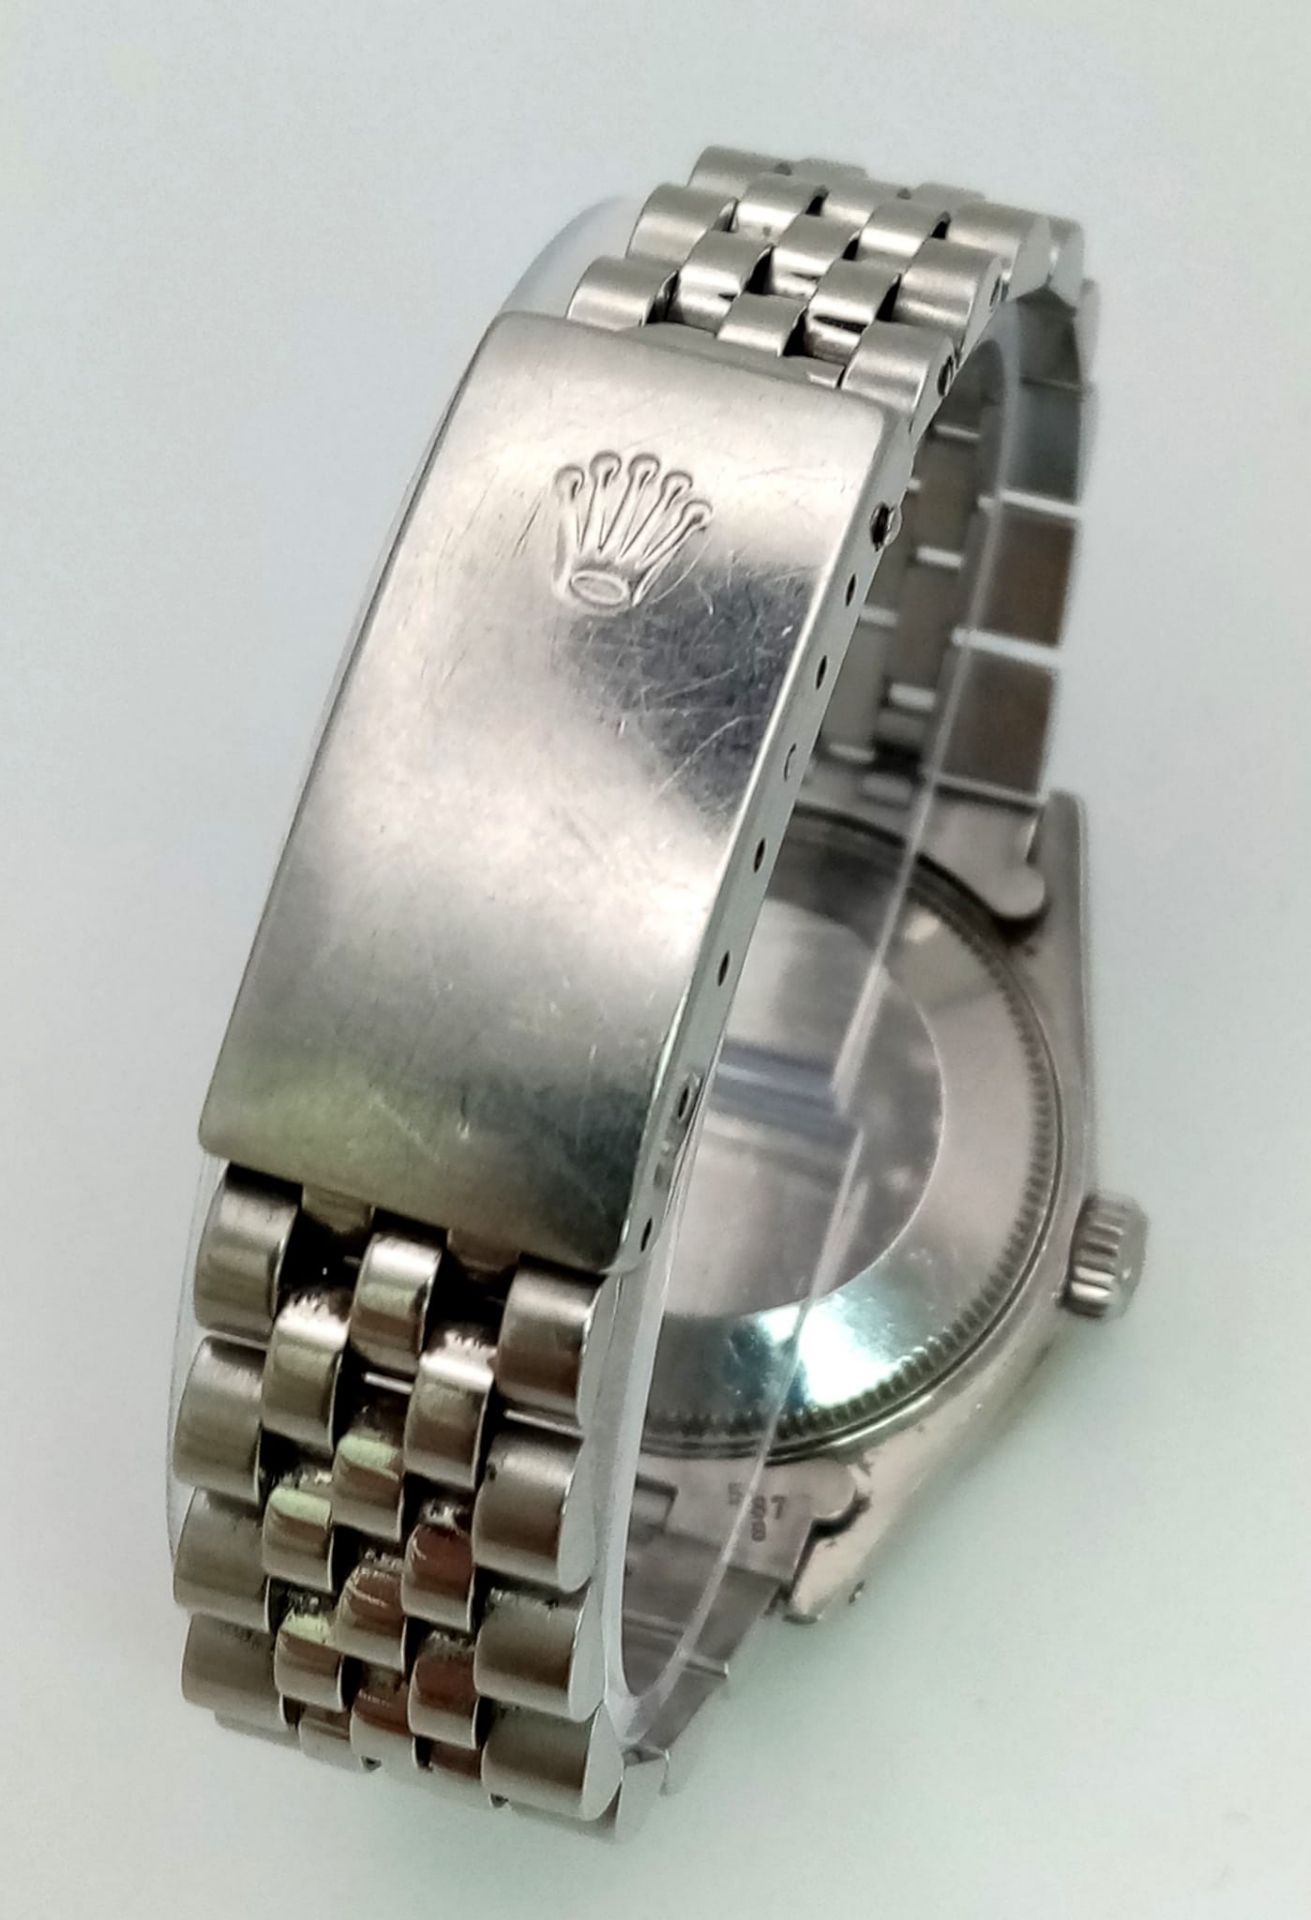 A ROLEX LADIES OYSTER PERPETUAL WRIST WATCH IN STAINLESS STEEL WITH DIAMOND BEZEL AND NUMERALS. - Image 6 of 9